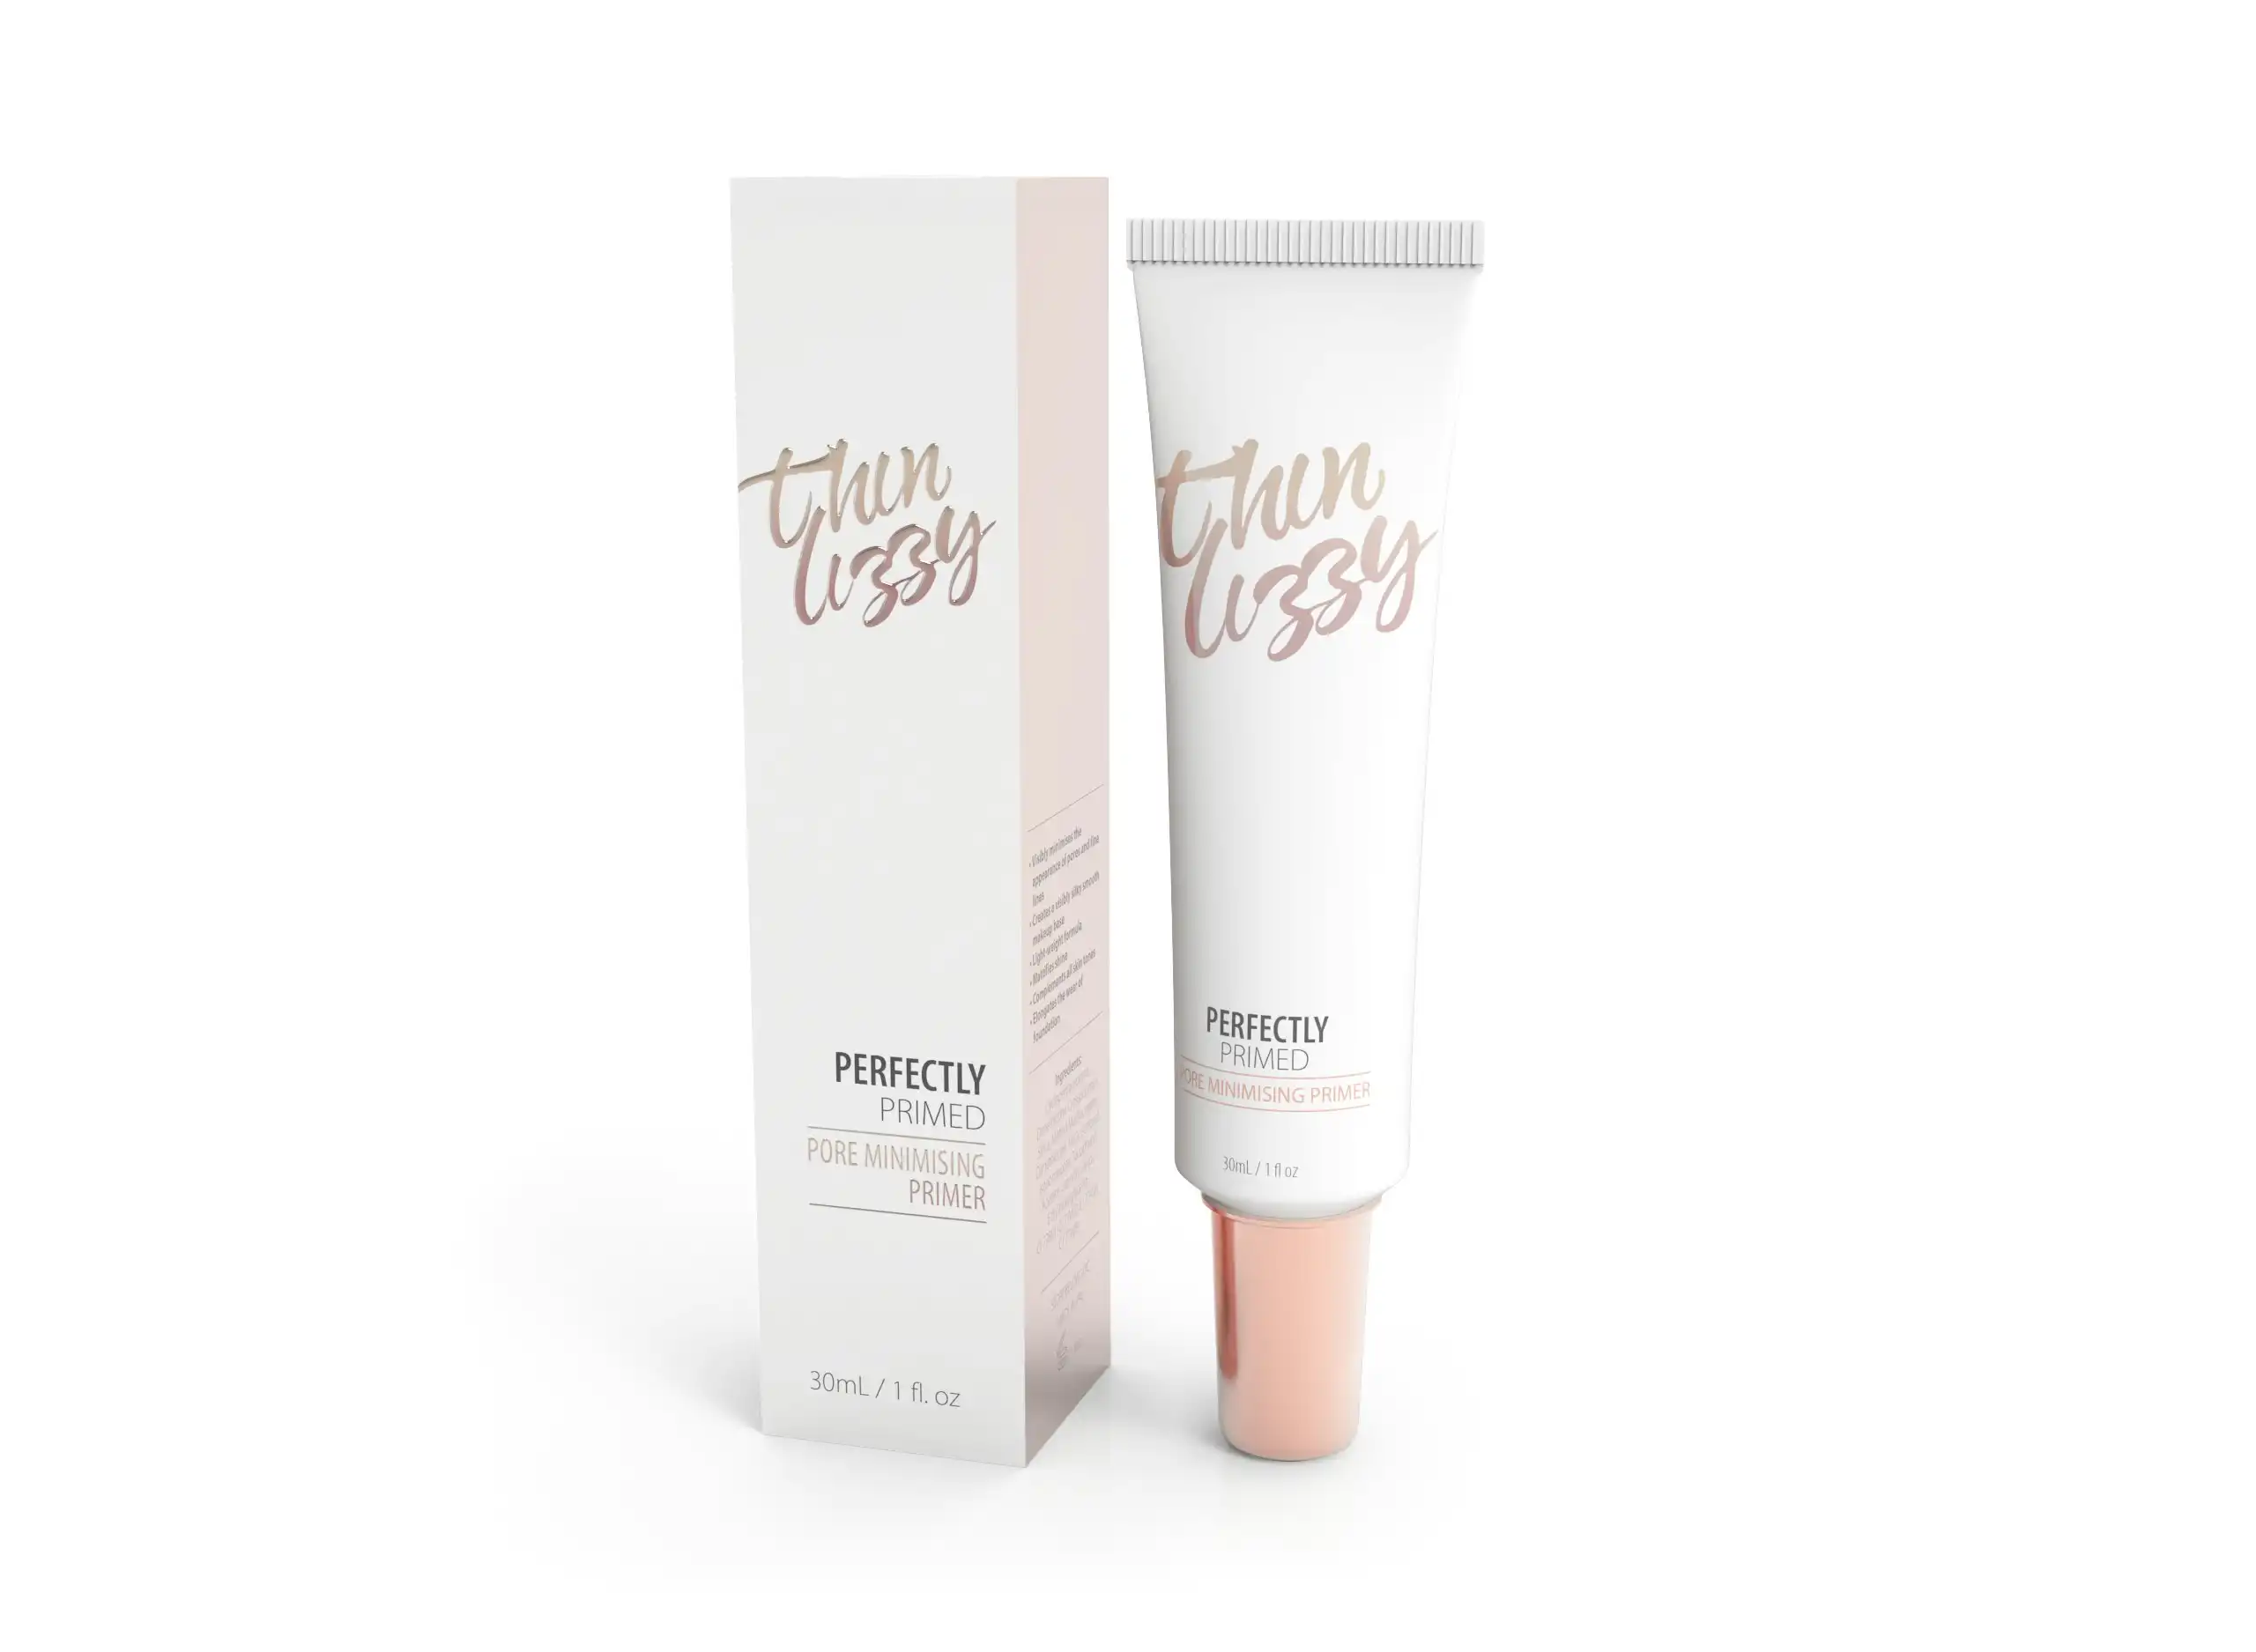 Thin Lizzy Perfectly Primed Pore Minimising Primer